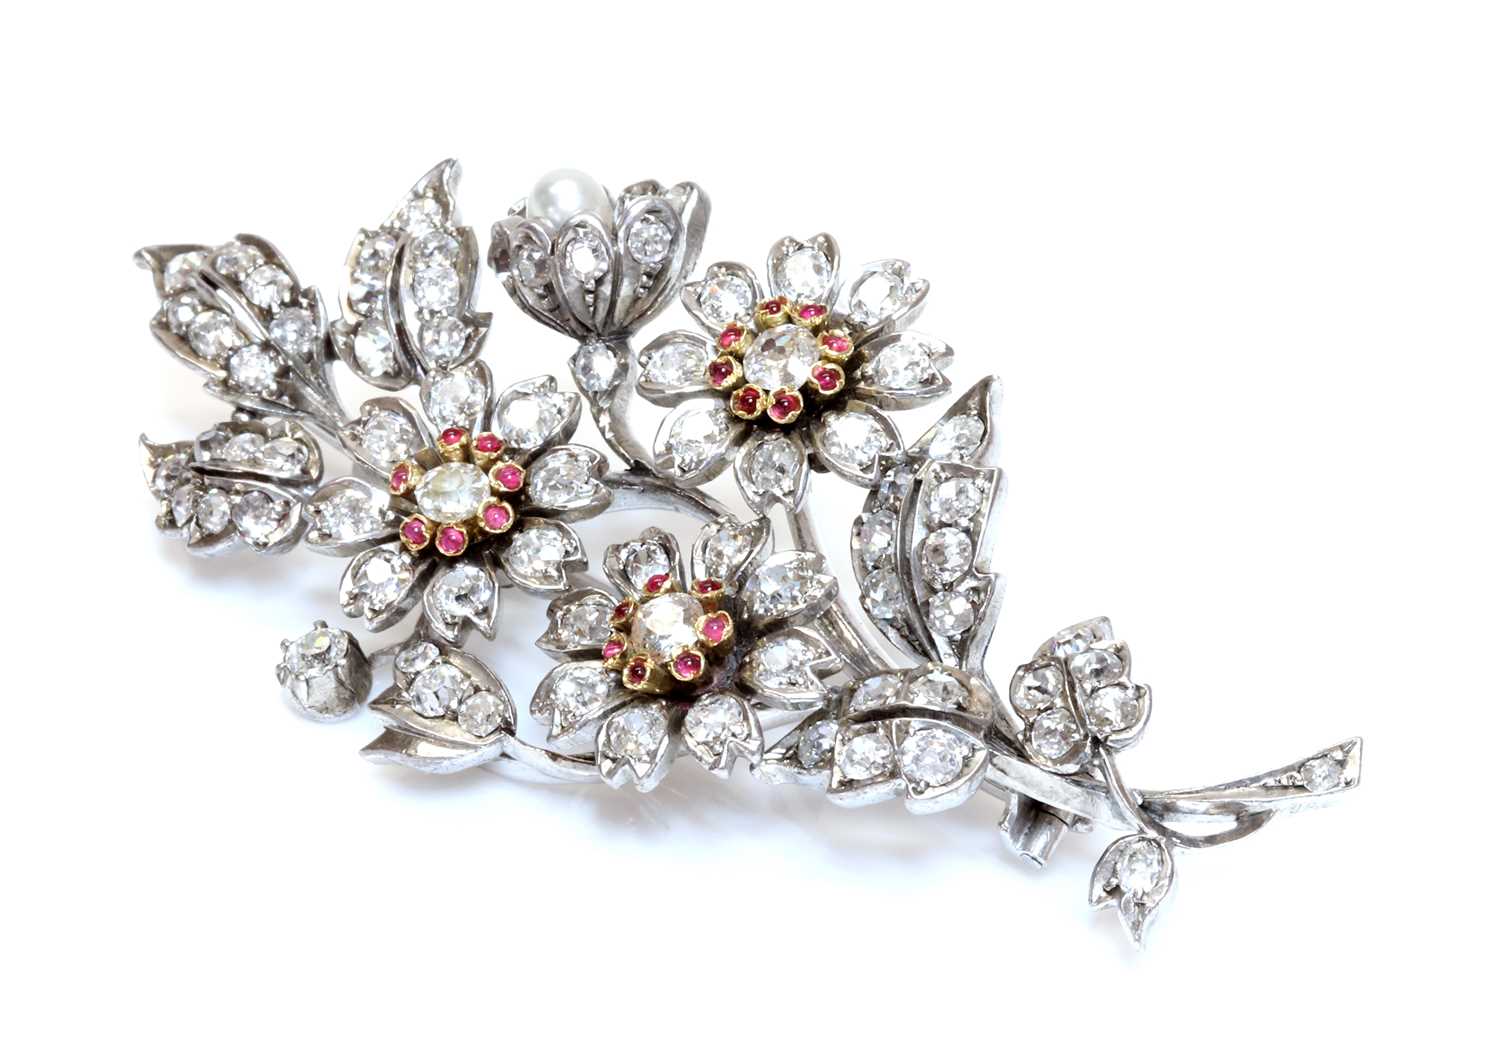 Lot 36 - A Victorian diamond, ruby and pearl spray brooch, c.1880